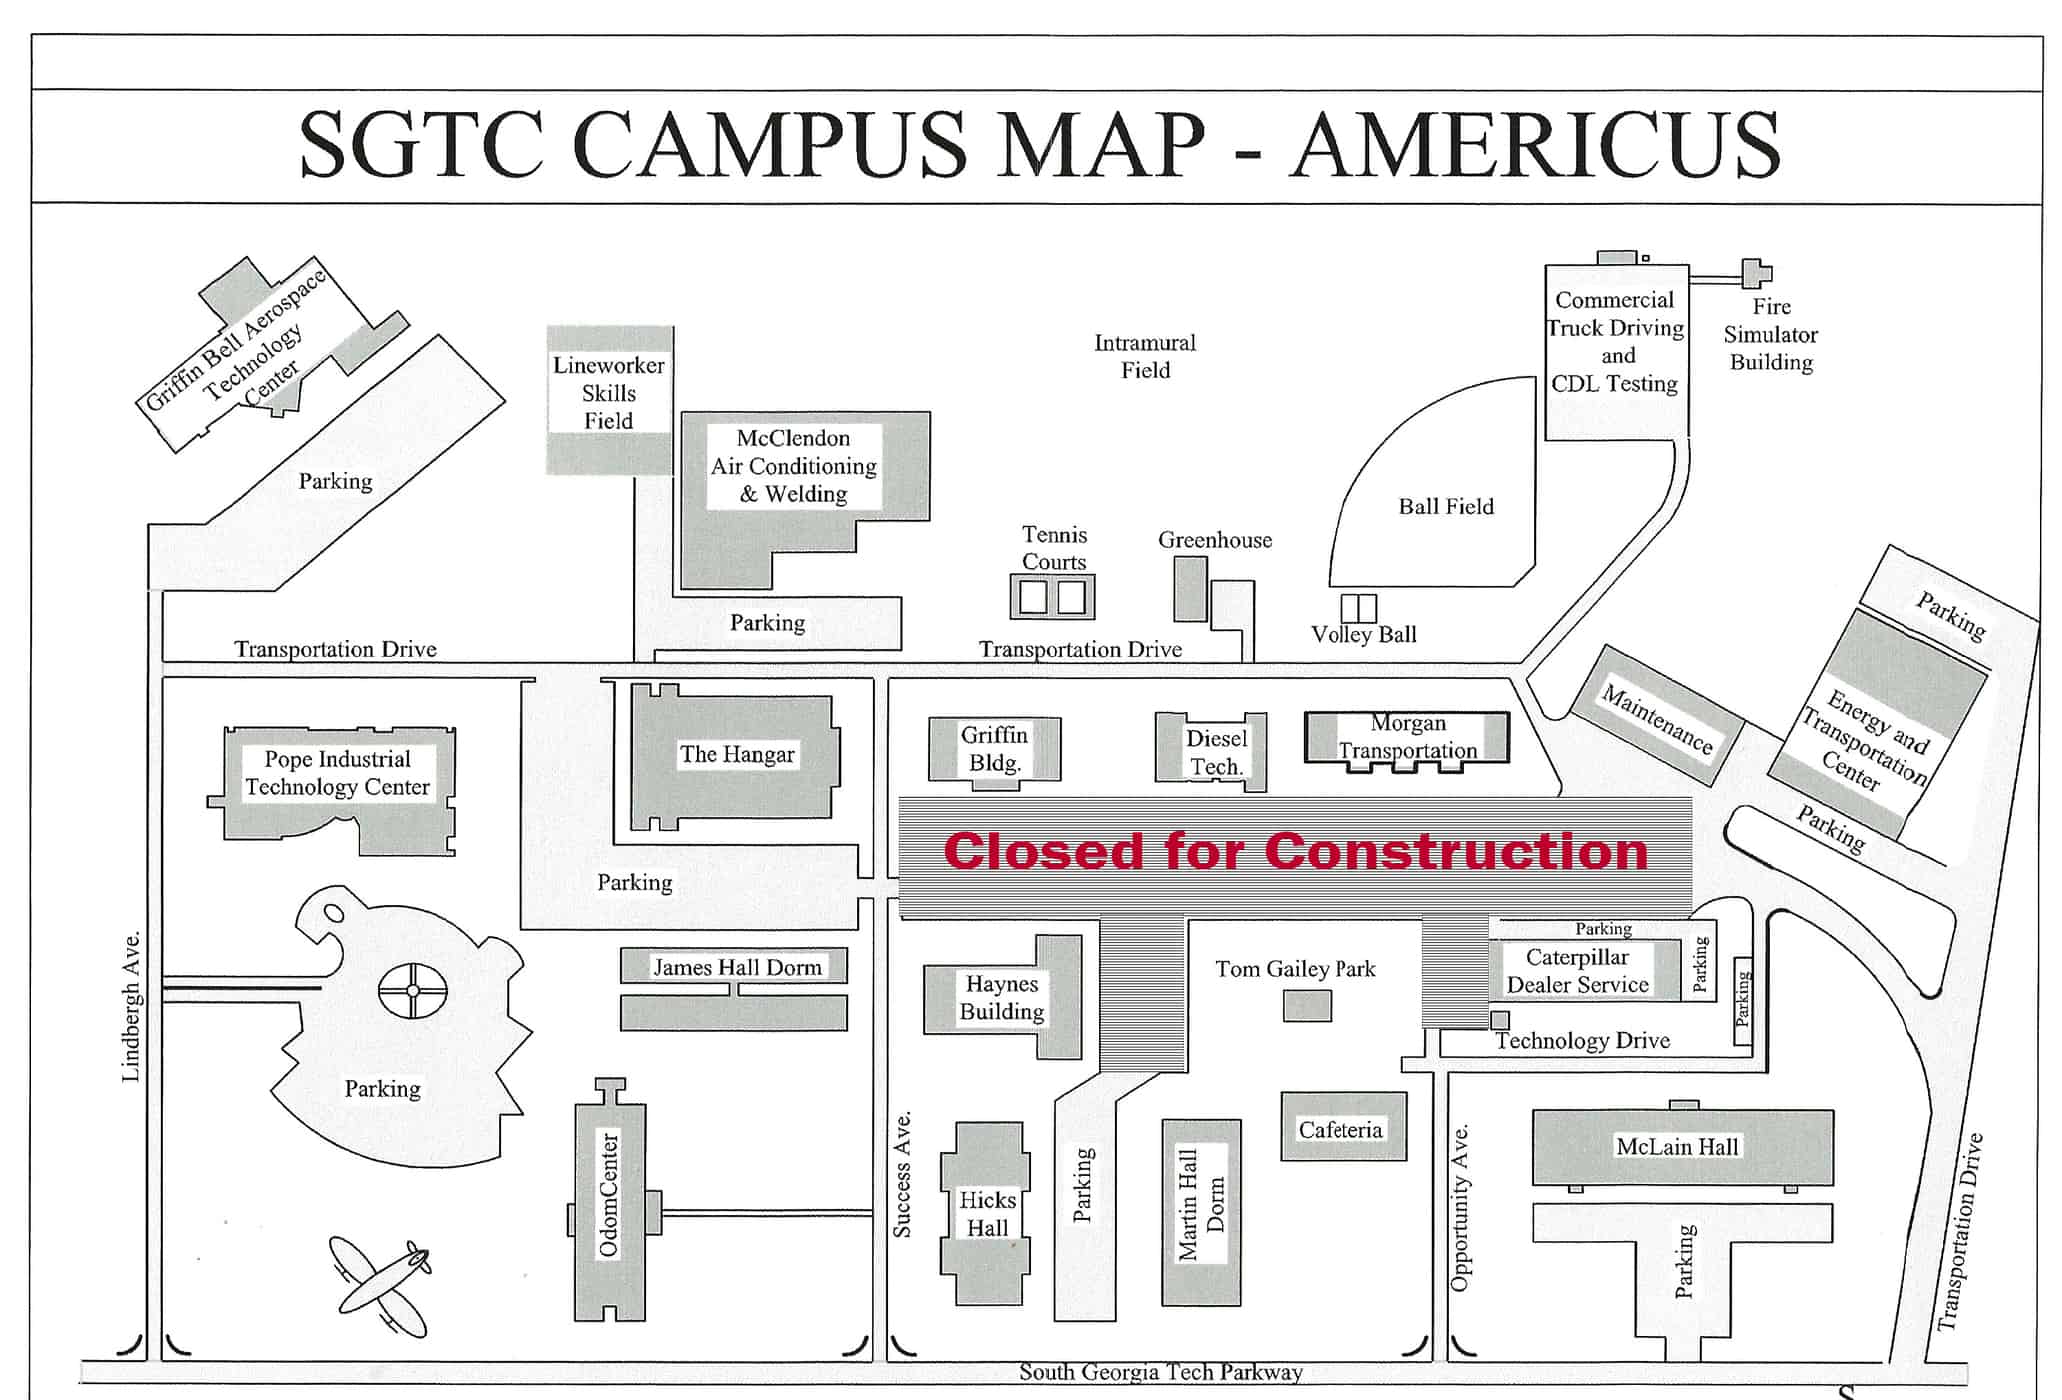 The center of the South Georgia Technical College Americus campus is closed due to construction work.